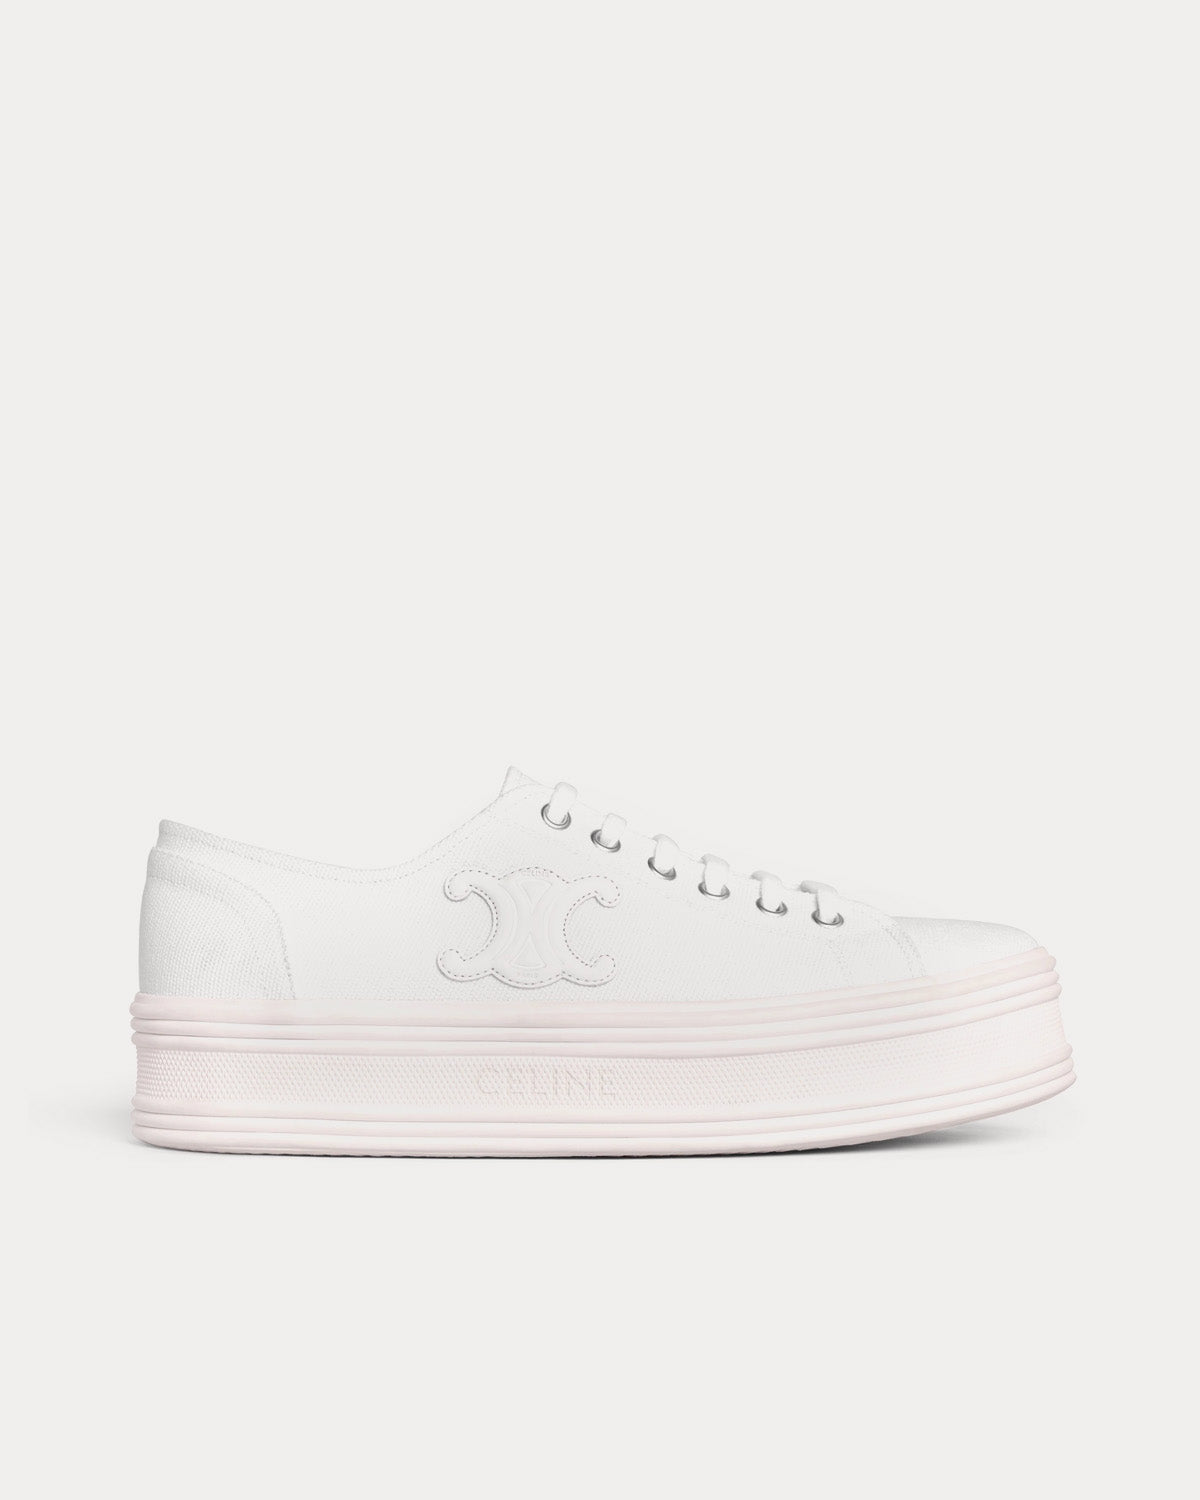 Celine - Jane Lace-Up Canvas & Calfskin Optic White Low Top Sneakers